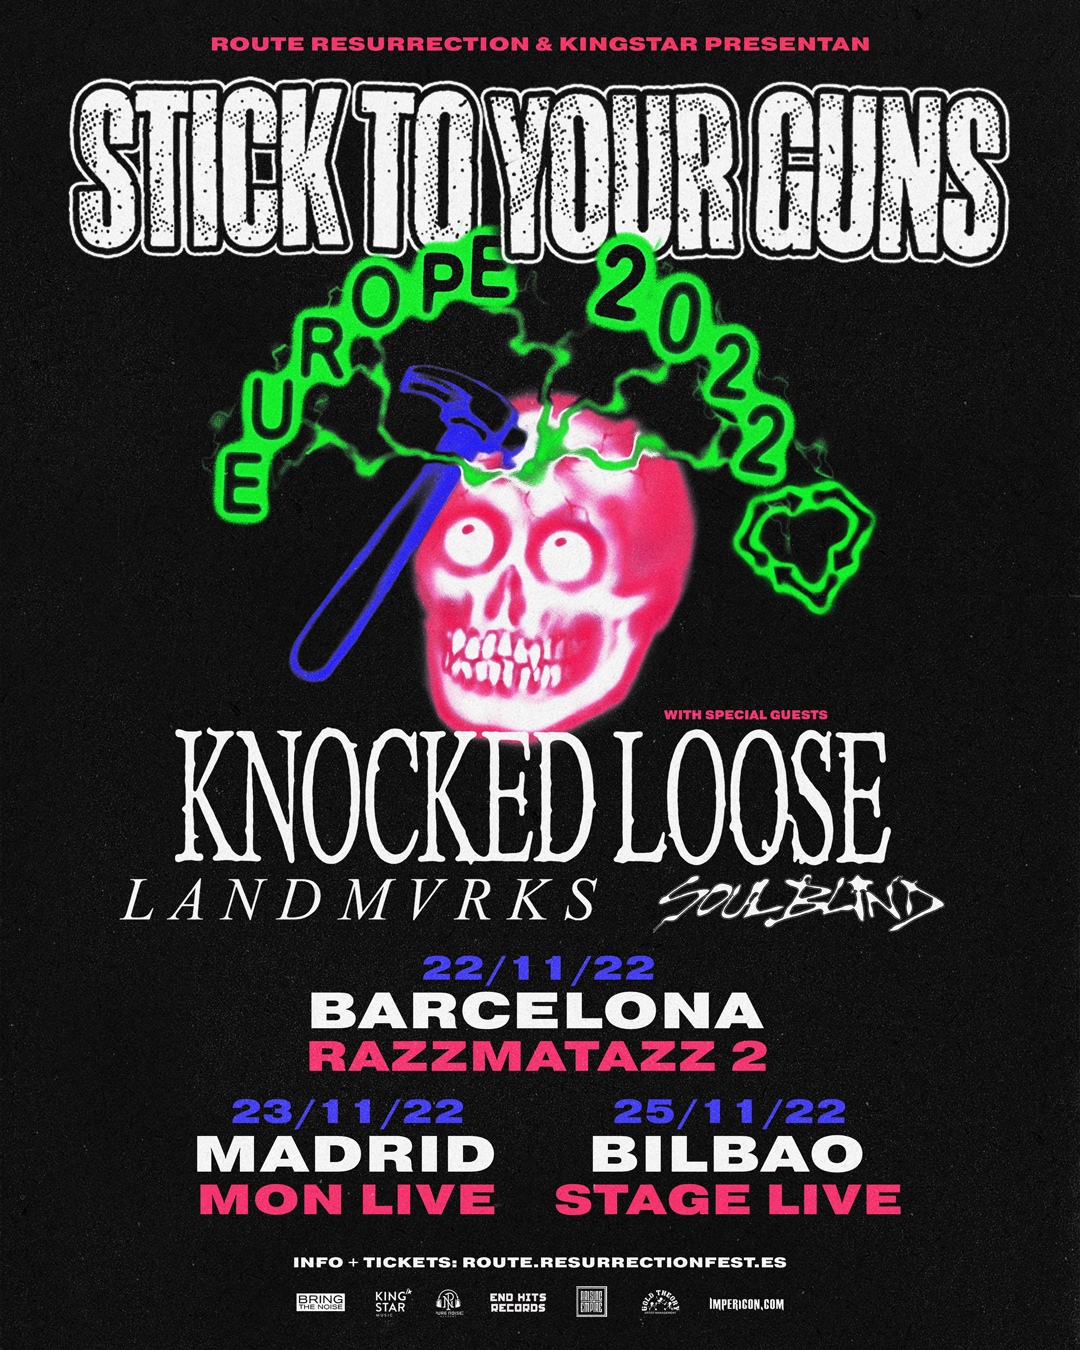 Route RF 2022: Stick To Your Guns + Knocked Loose + Landmvrks + Soul Blind (Bilbao)